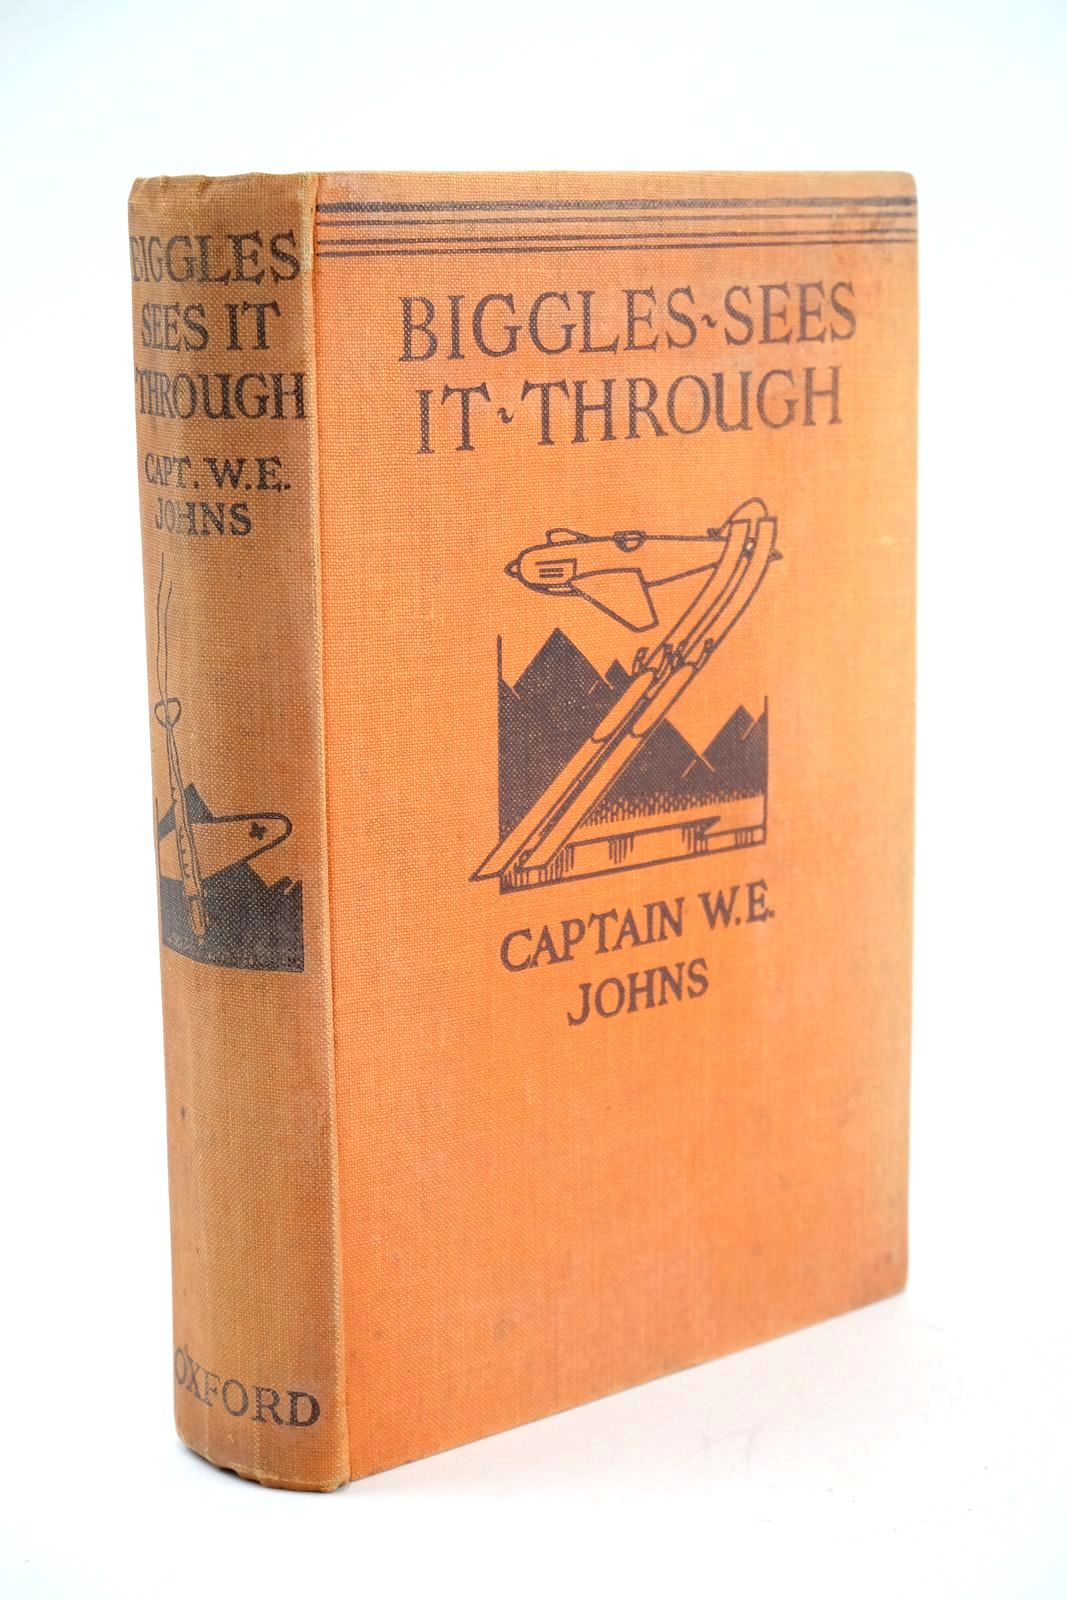 Photo of BIGGLES SEES IT THROUGH written by Johns, W.E. illustrated by Leigh, Howard Sindall, Alfred published by Oxford University Press (STOCK CODE: 1324030)  for sale by Stella & Rose's Books